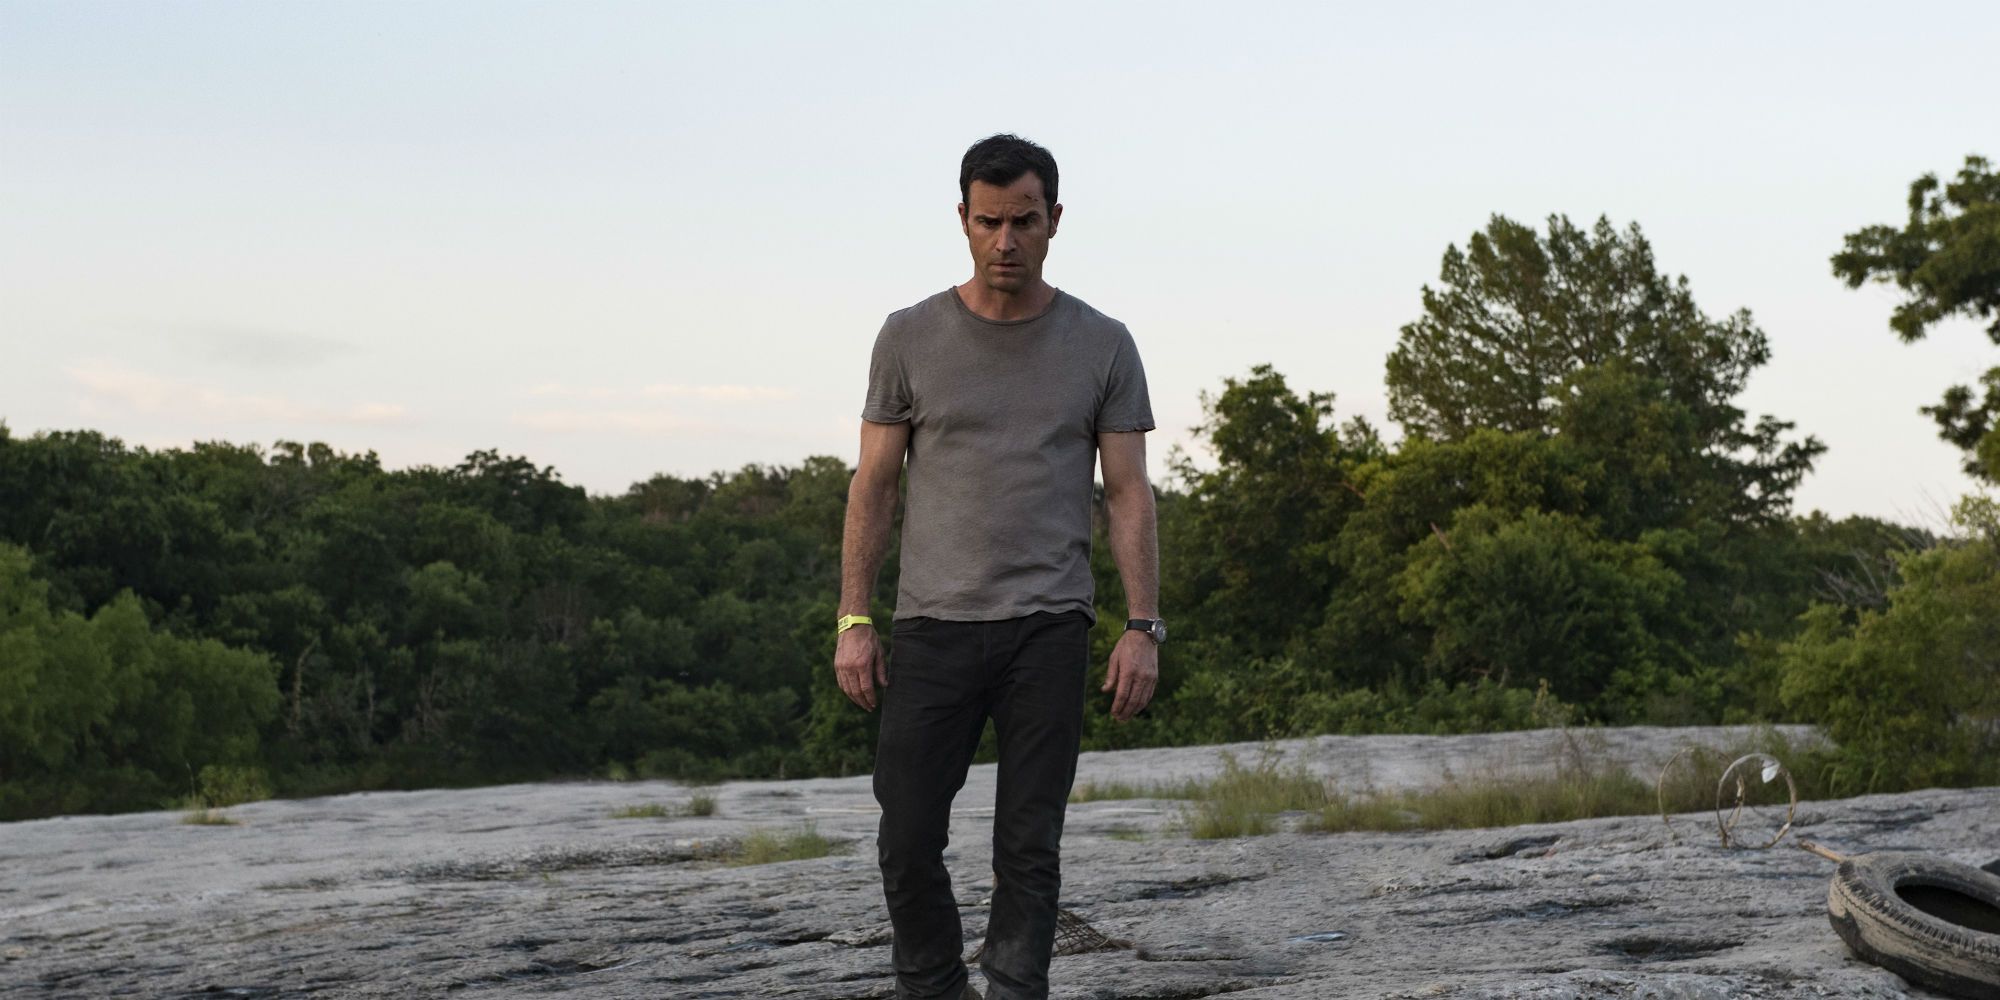 The Leftovers Justin Theroux